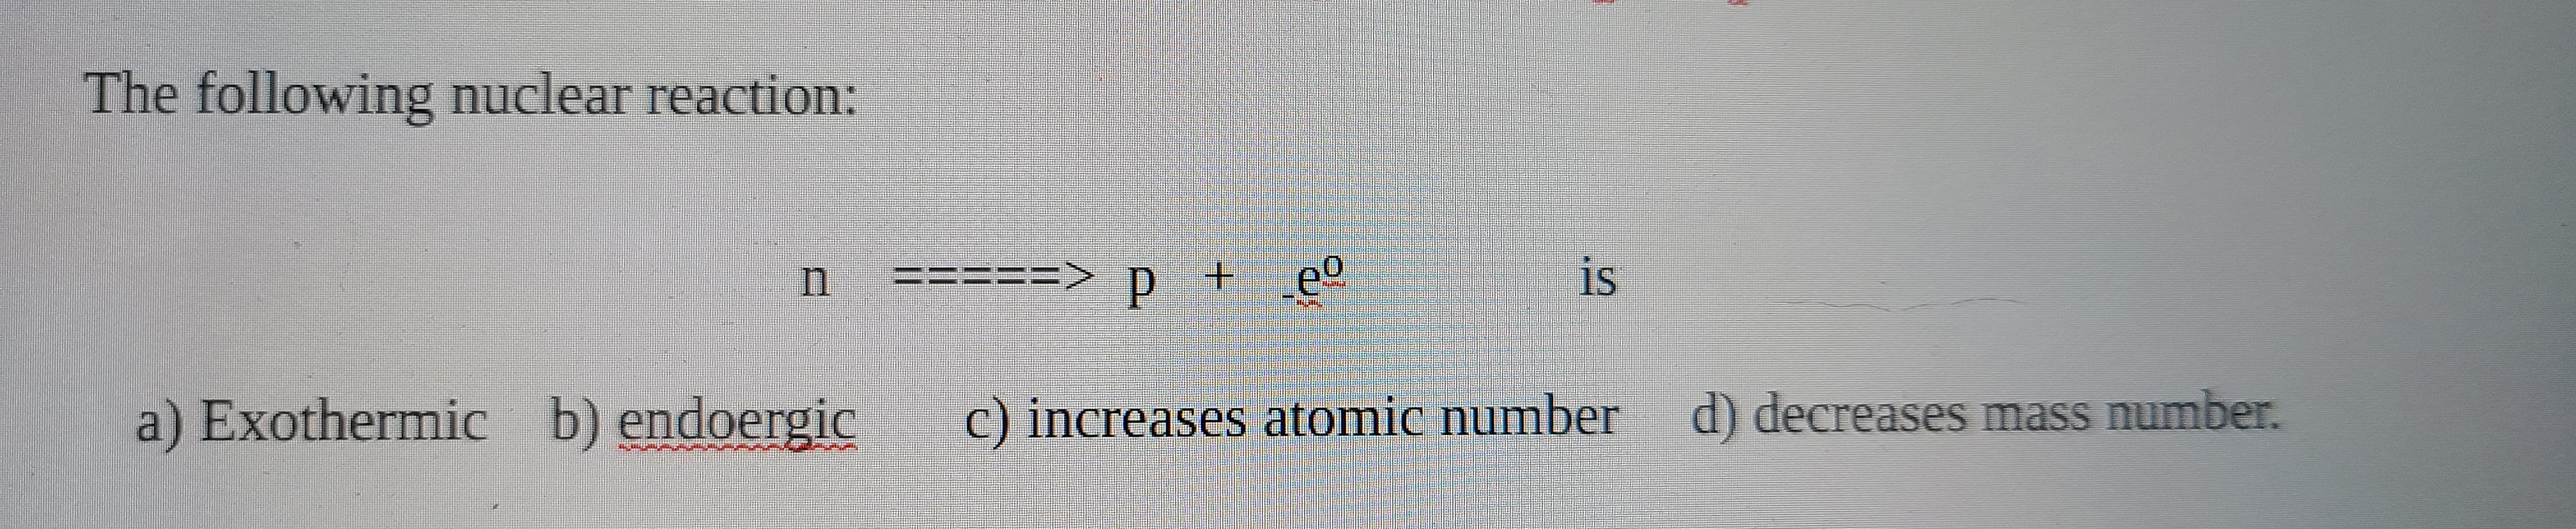 The following nuclear reaction:
a) Exothermic b) endoergic
C) increascs atomie number
d) decreases mass number.
